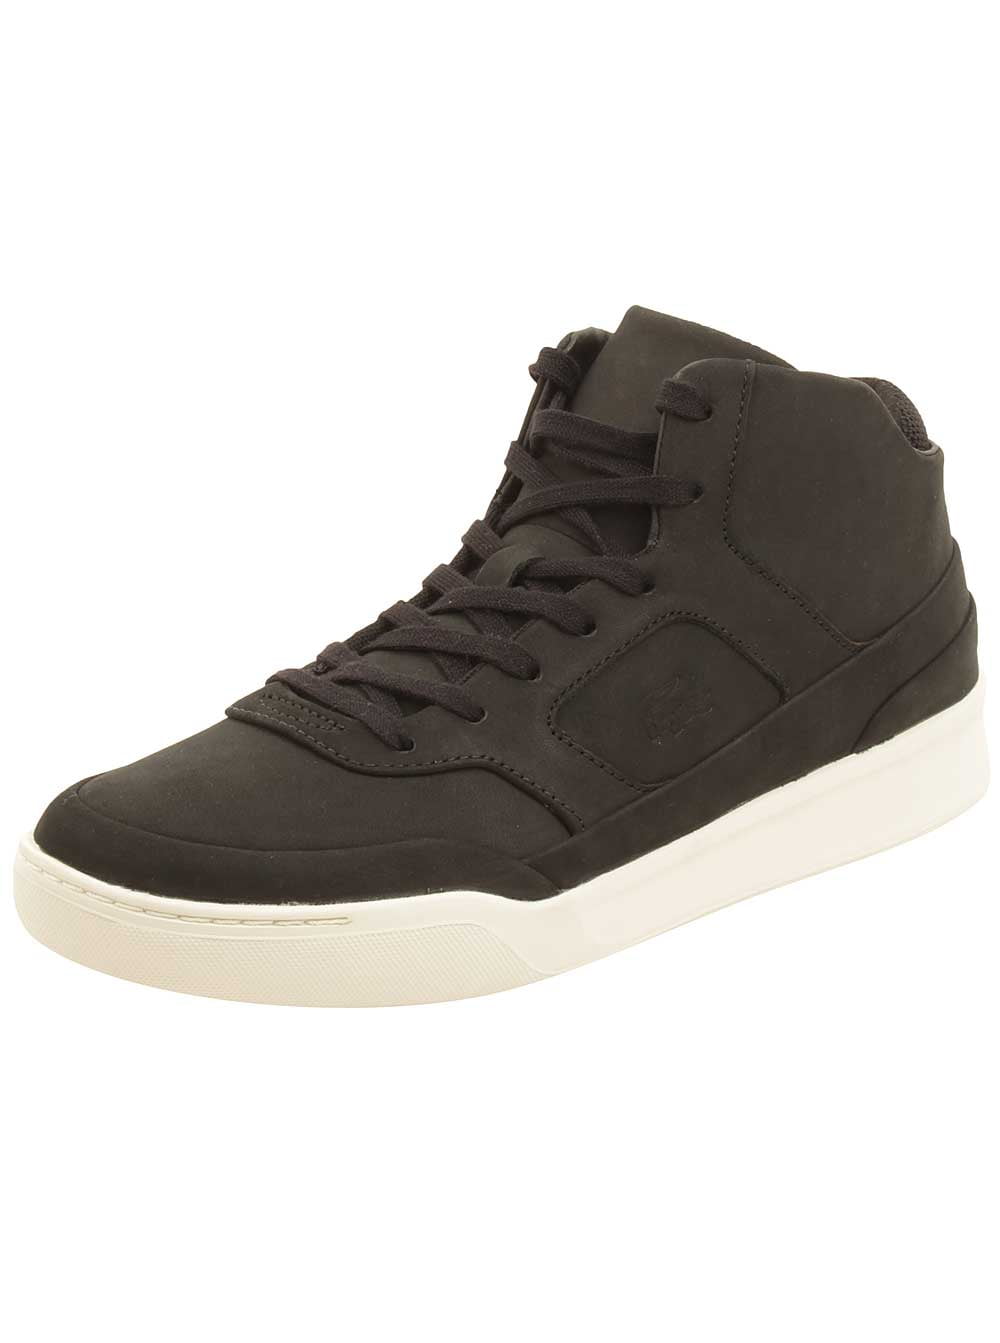 Sicily Juggling Playing chess Lacoste Mens Explorateur Mid 416 Sneakers in Black - Walmart.com